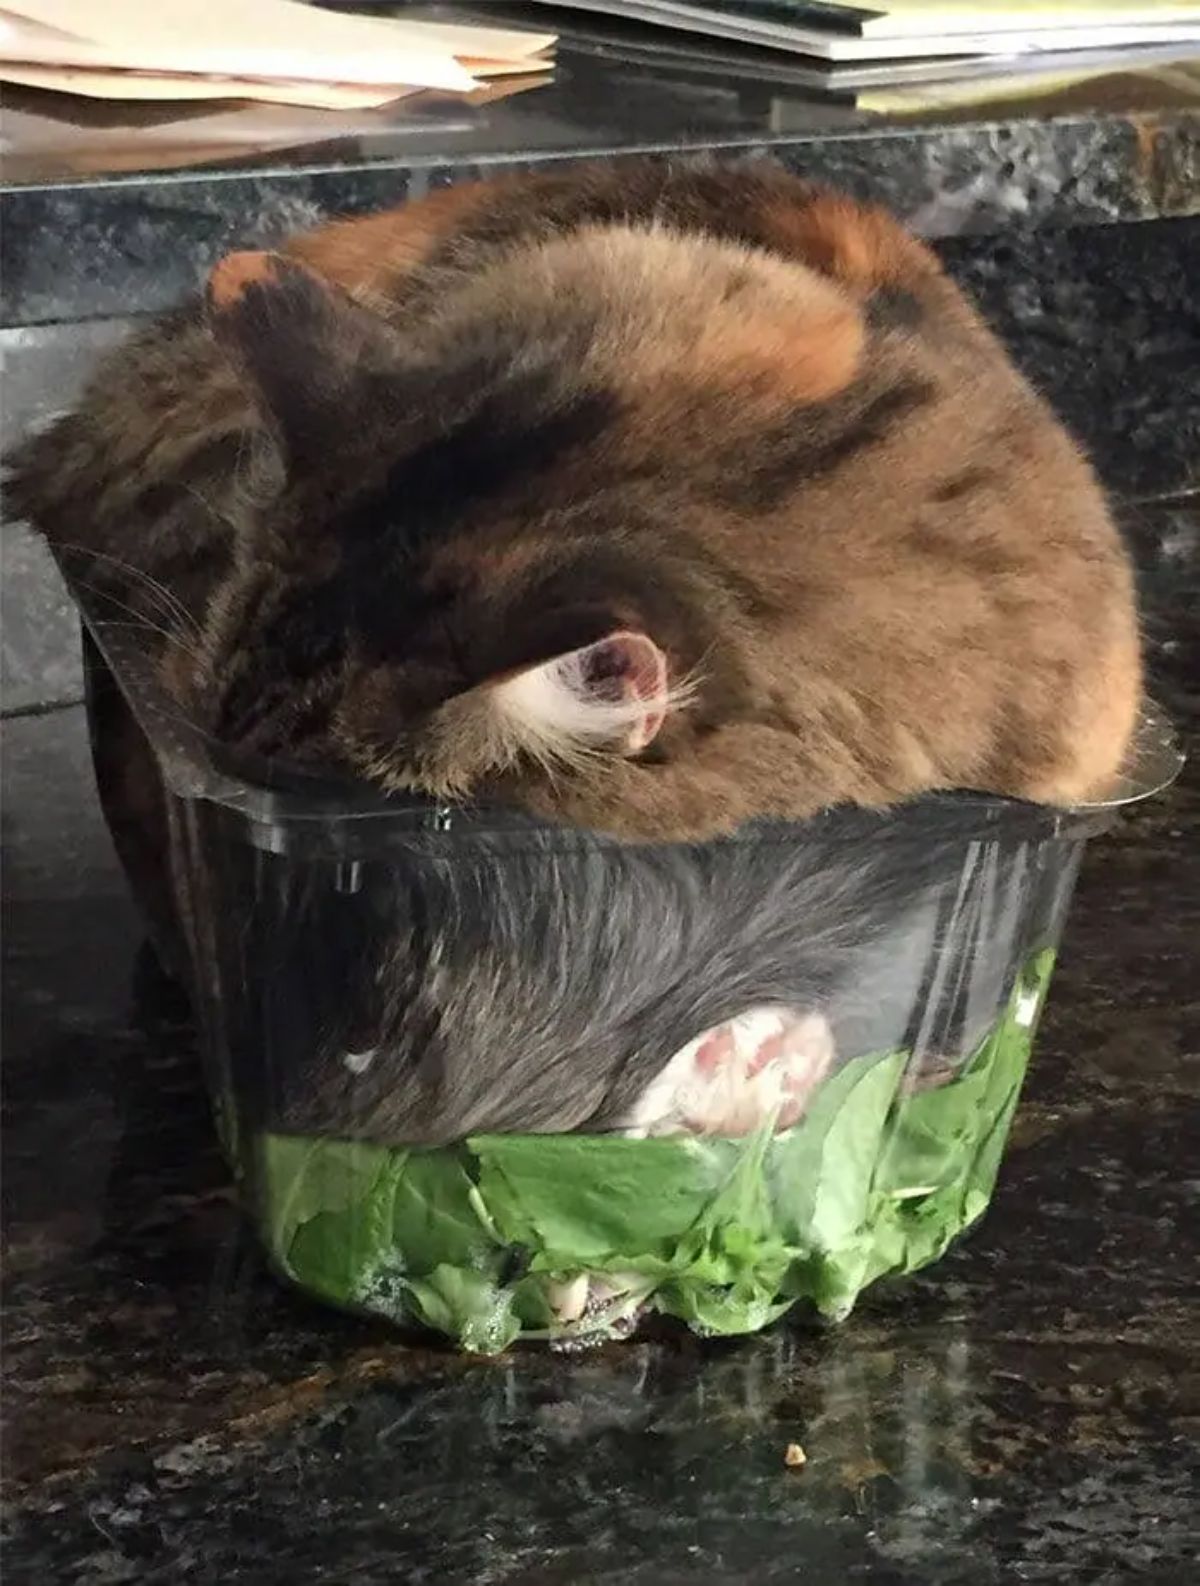 brown tabby cat sleeping in a glass bowl with salad at the bottom